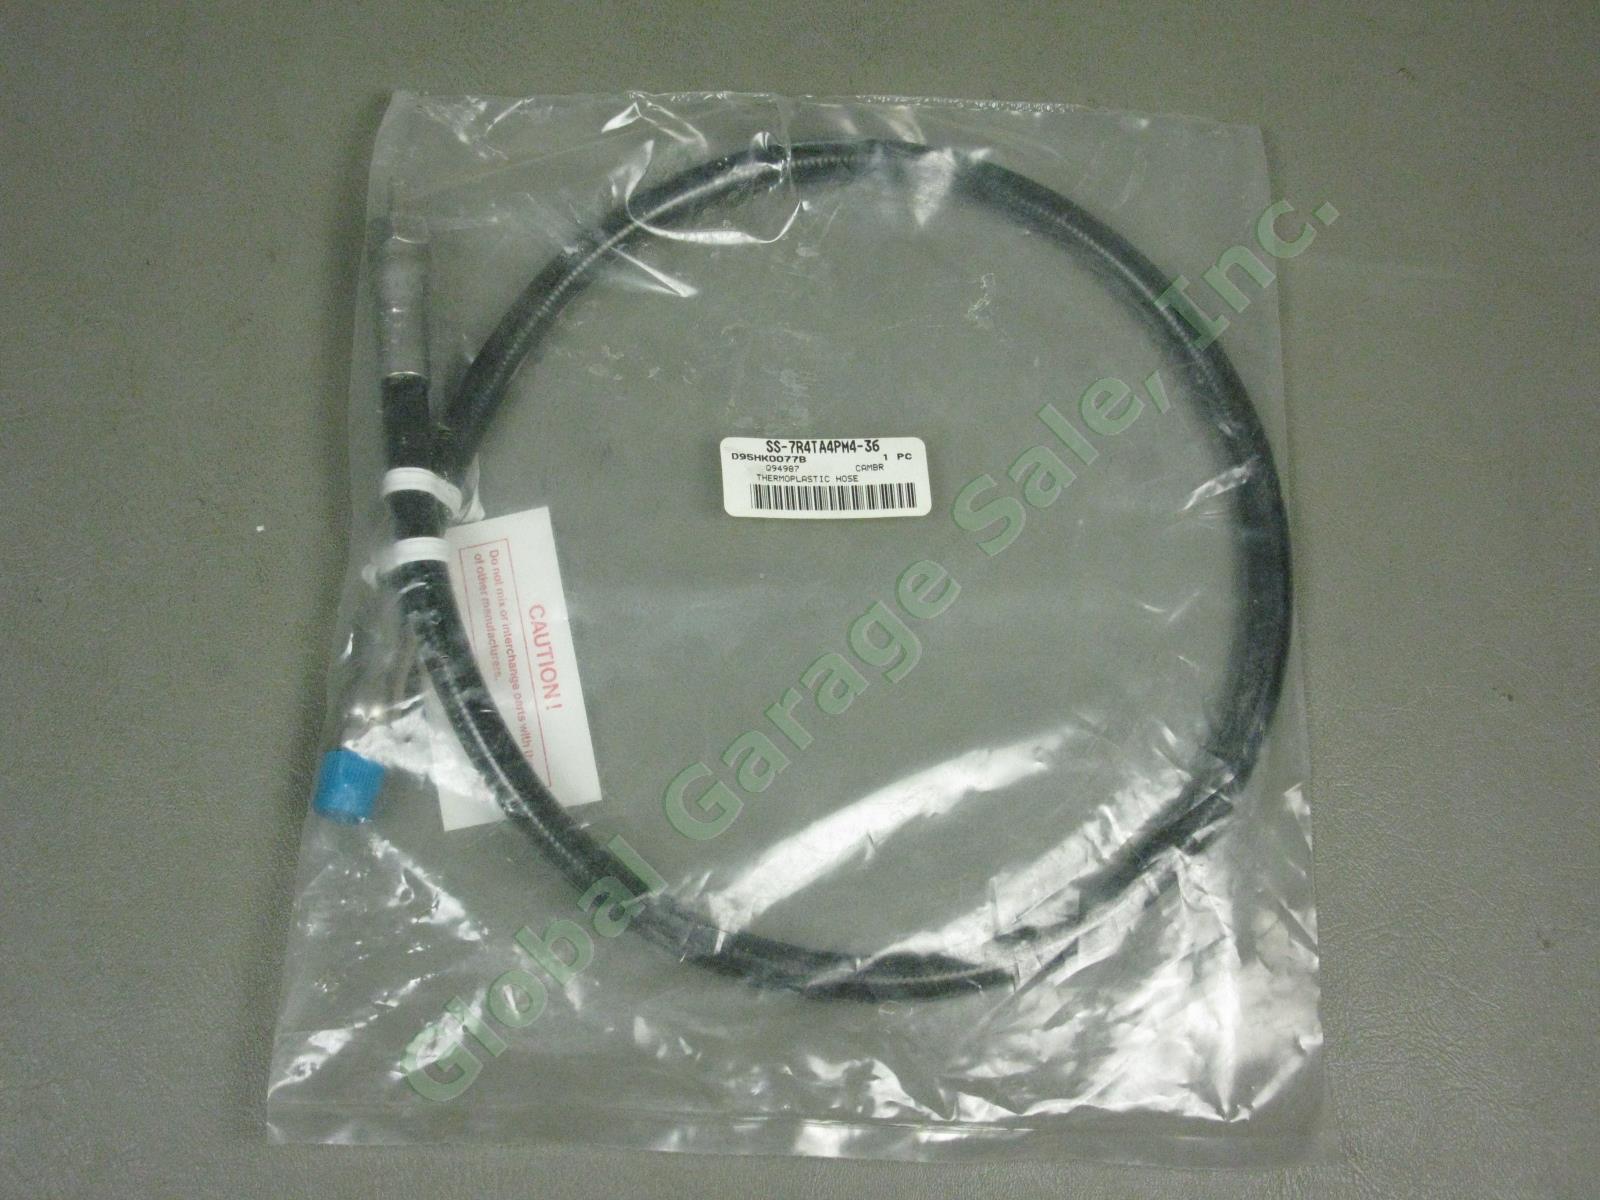 Swagelok 1/4" Male High Pressure Thermoplastic Hose Stainless SS-7R4TA4PM4-36"